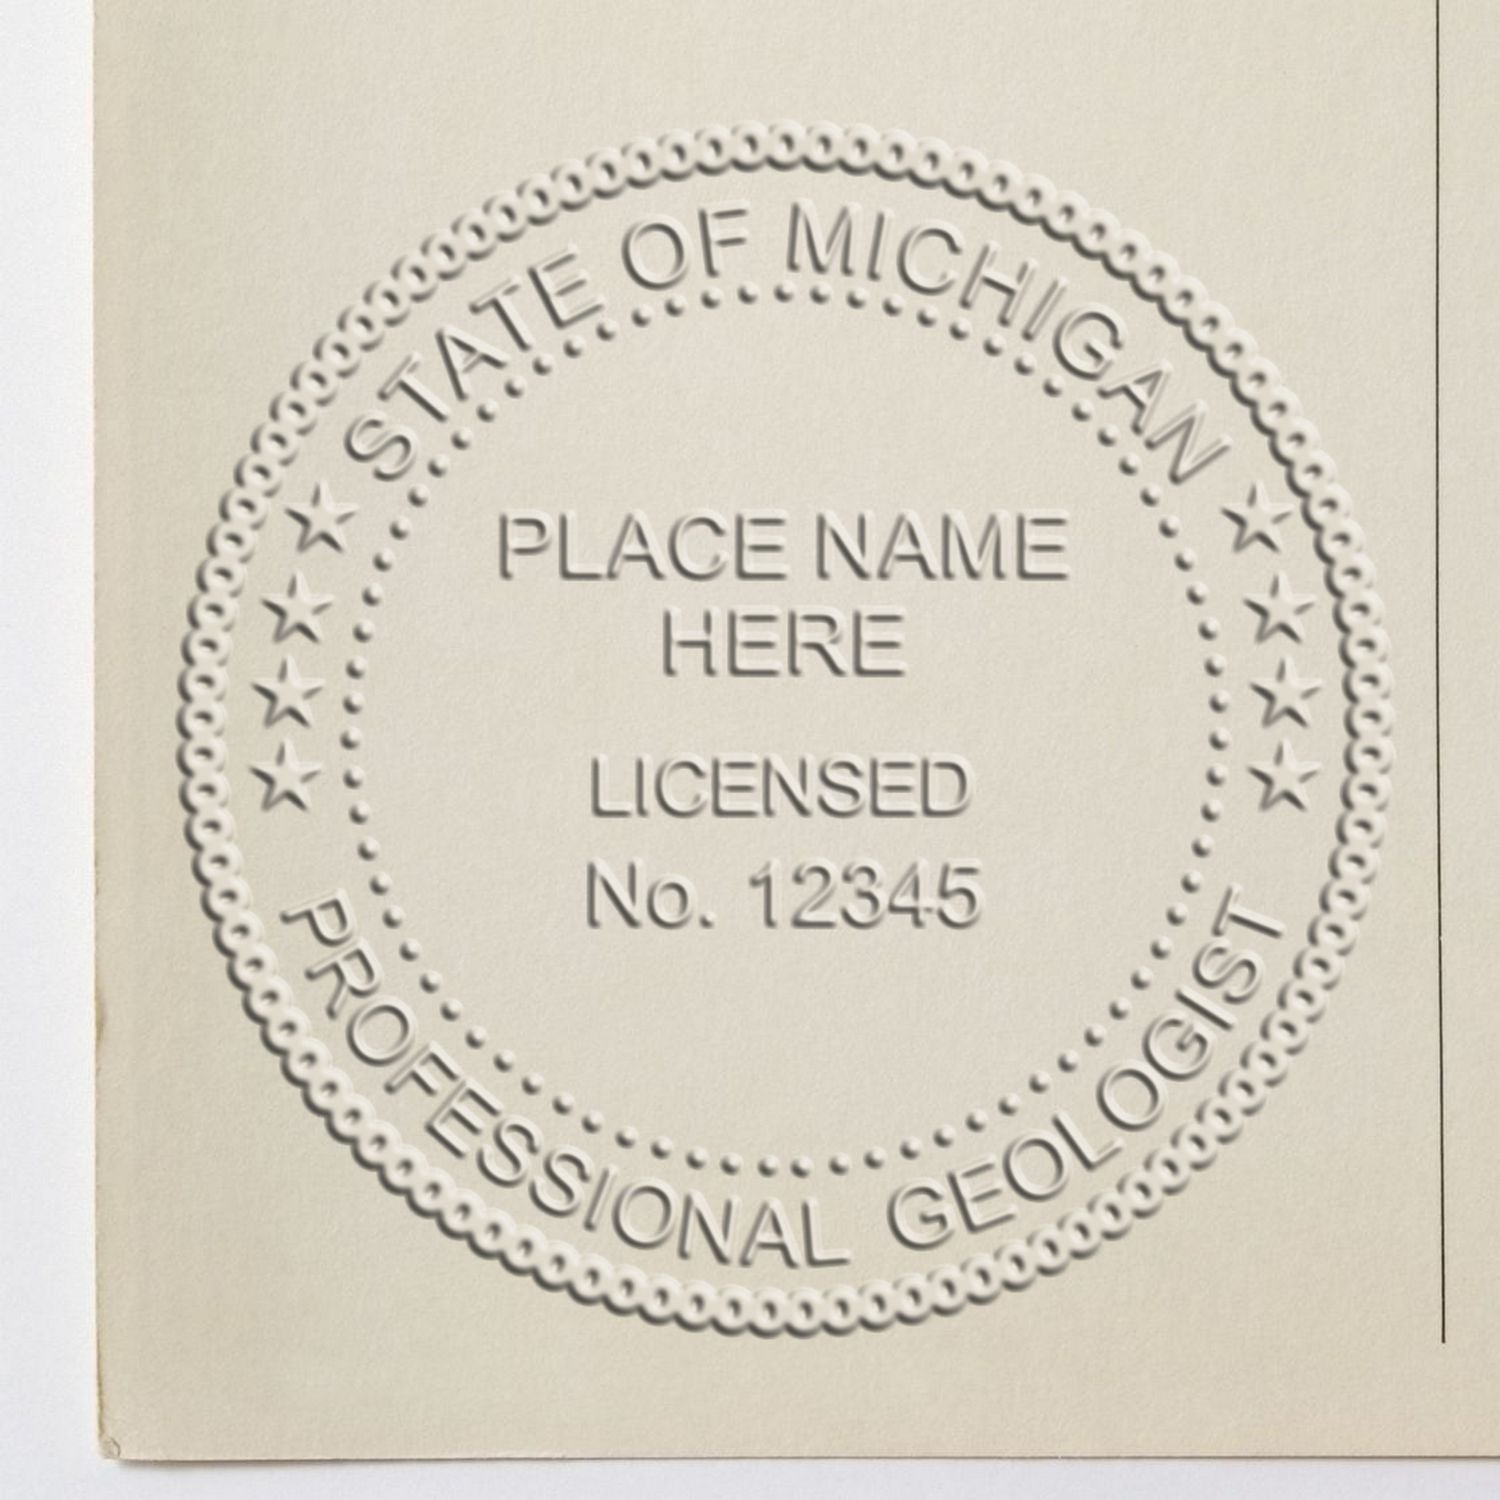 The main image for the State of Michigan Extended Long Reach Geologist Seal depicting a sample of the imprint and imprint sample